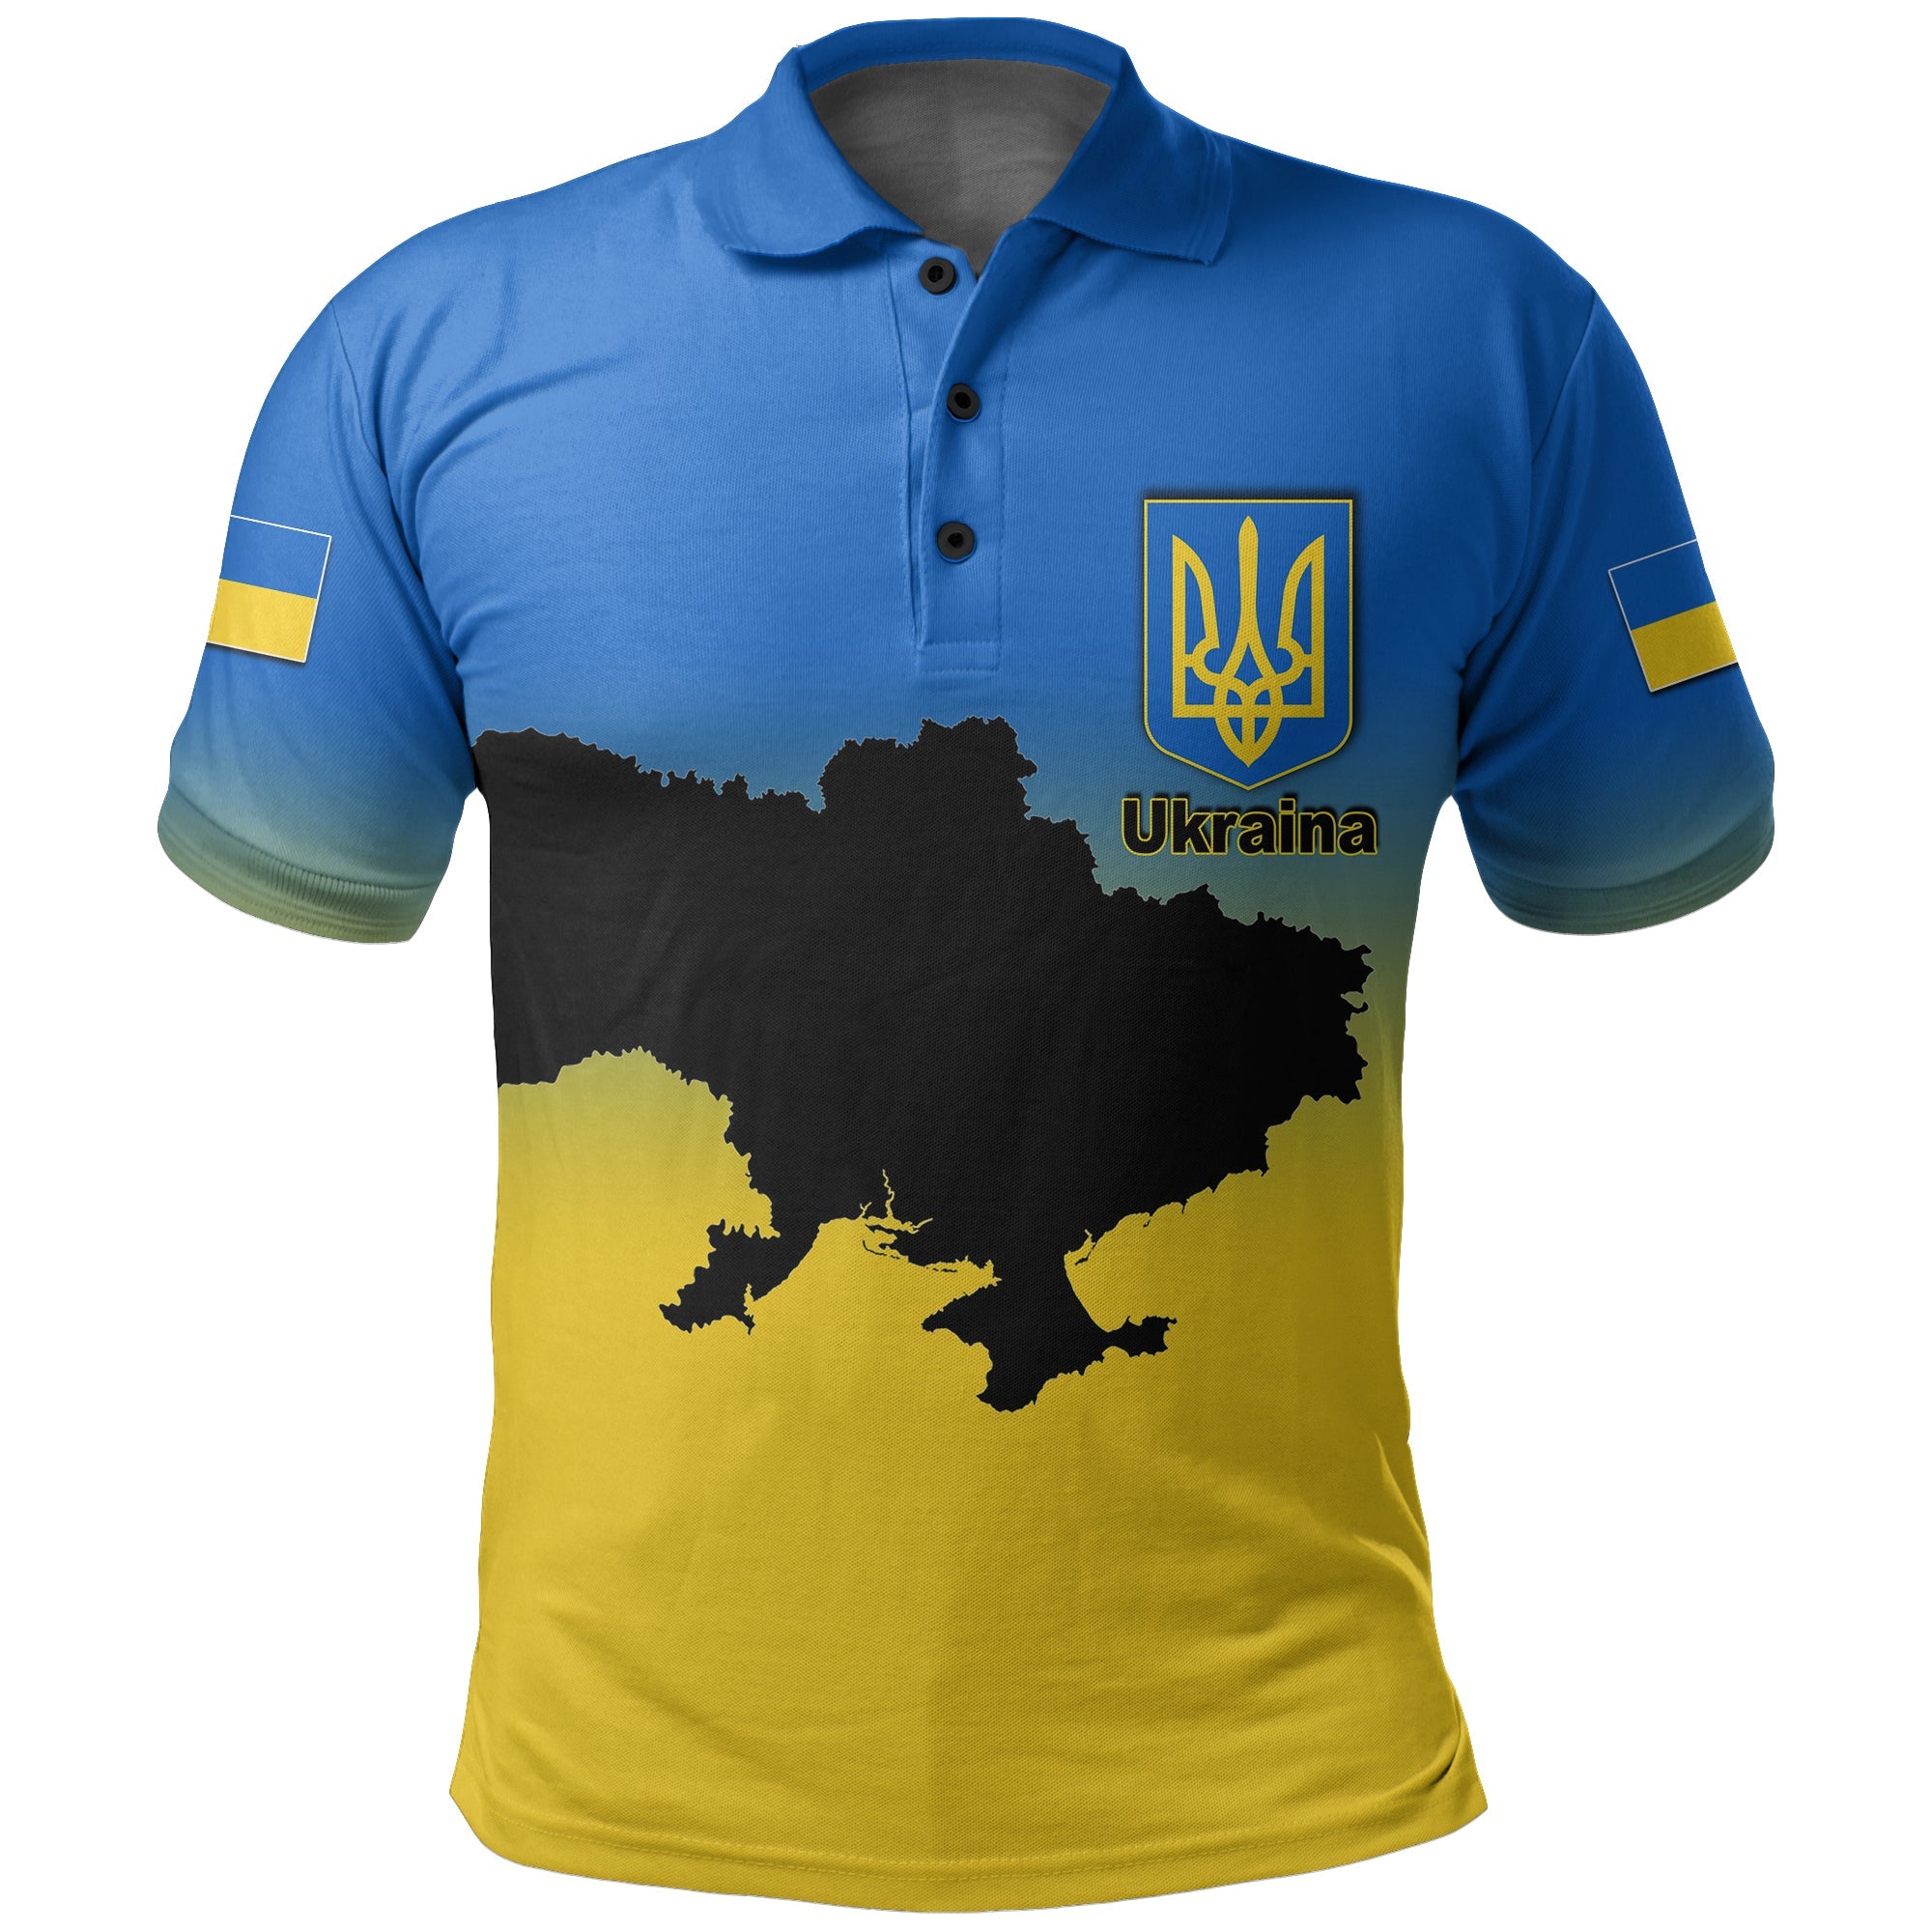 custom-personalised-ukraine-polo-shirt-with-map-stand-with-ukraine